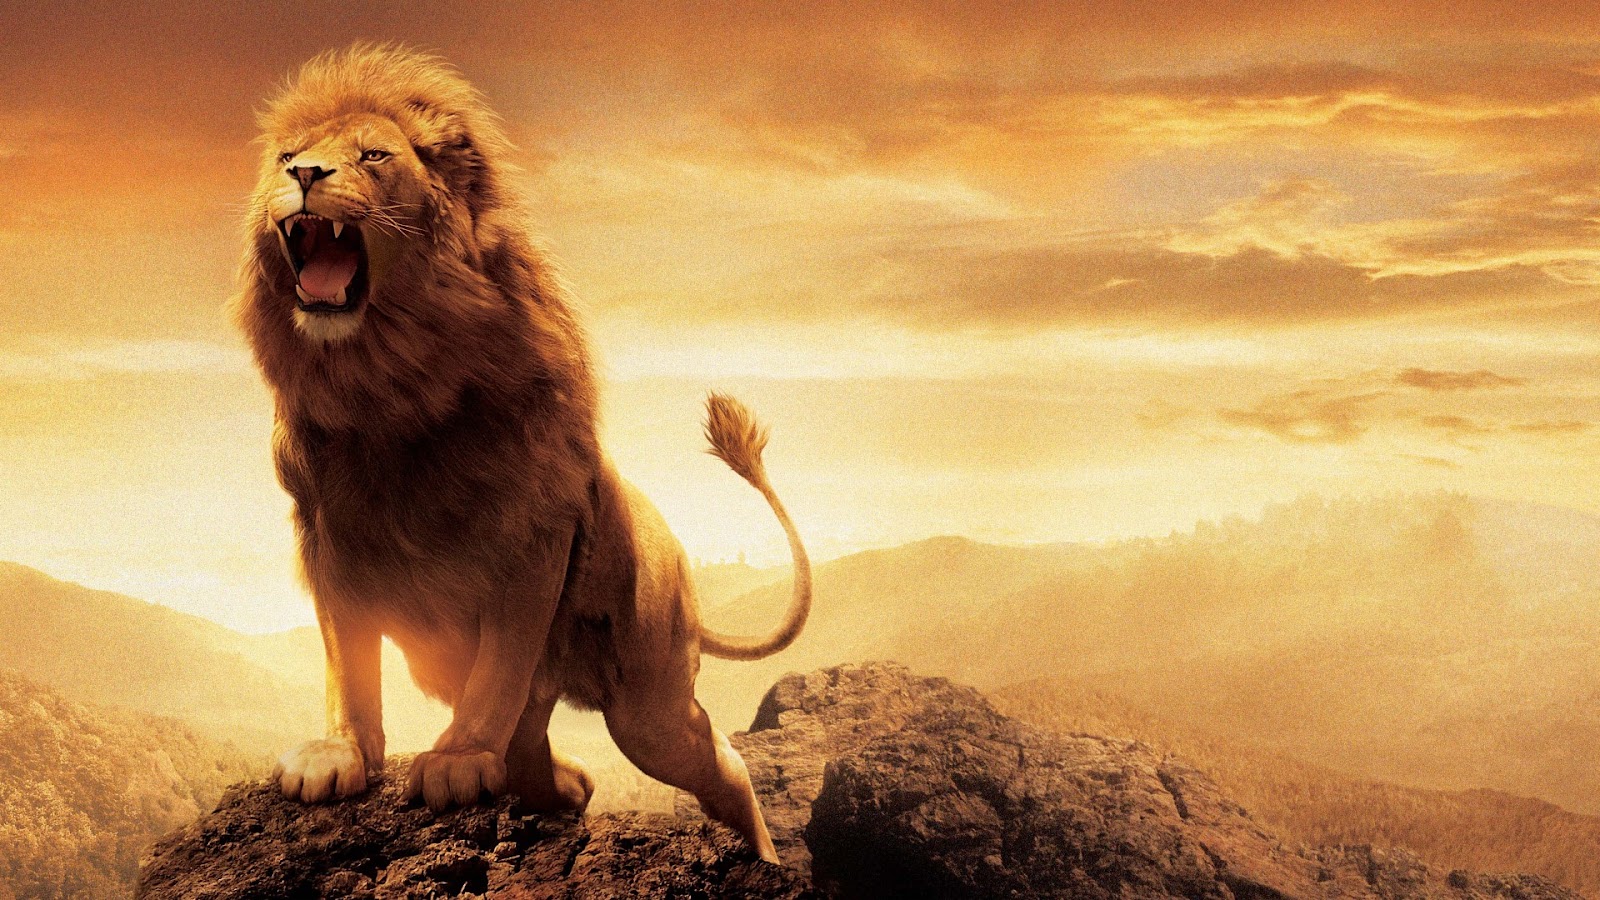 C S Lewis Letter Testifies Narnia's Lion as Christ